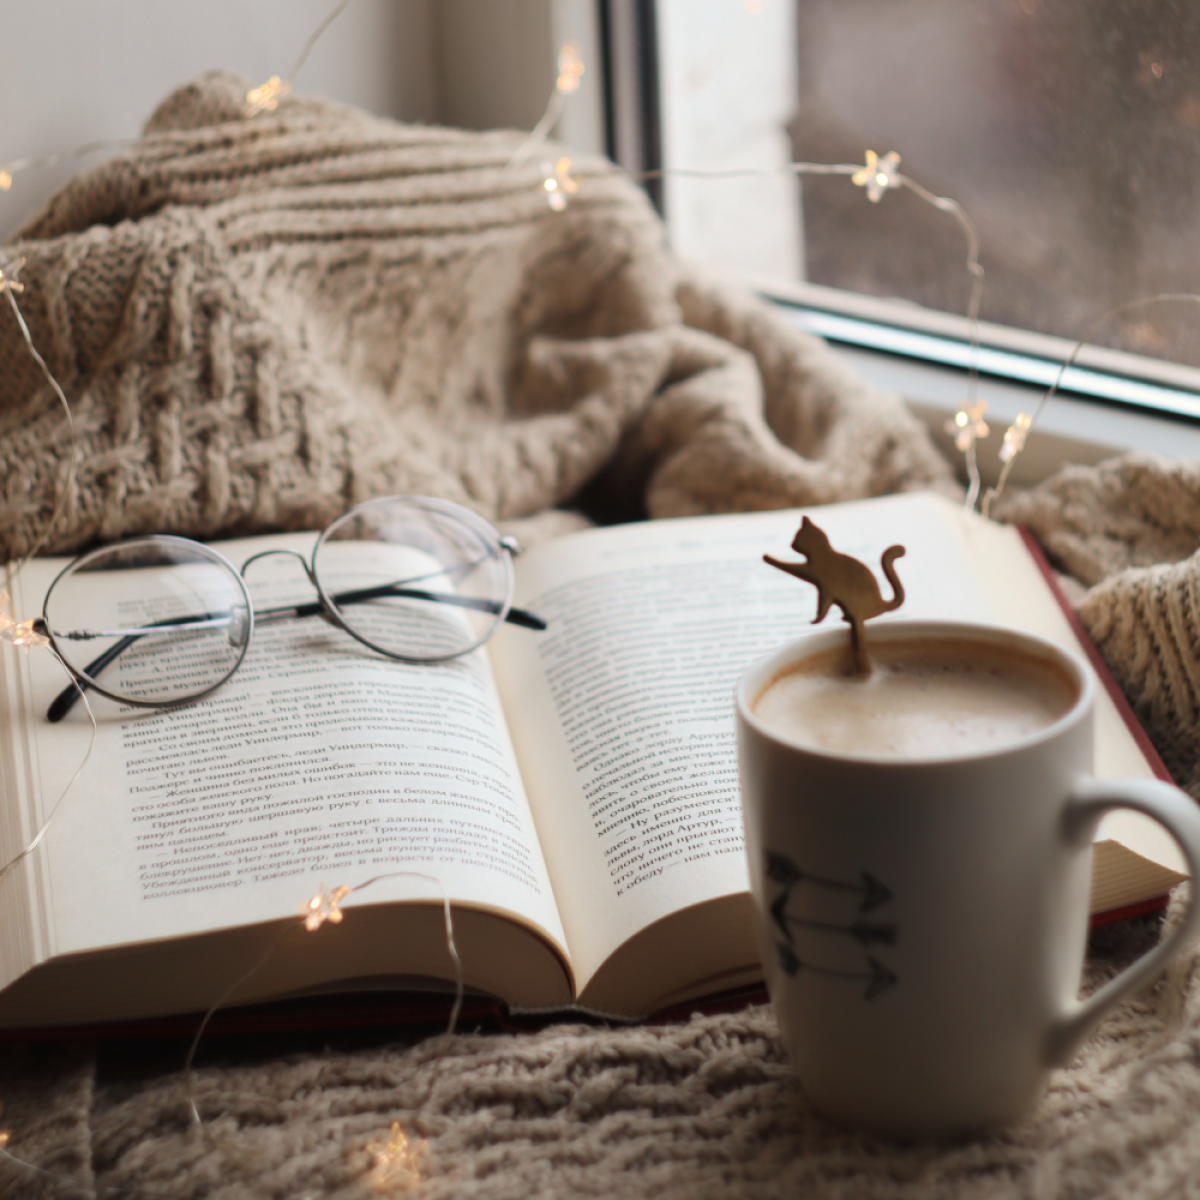 Cozy scene with a book and a coffee